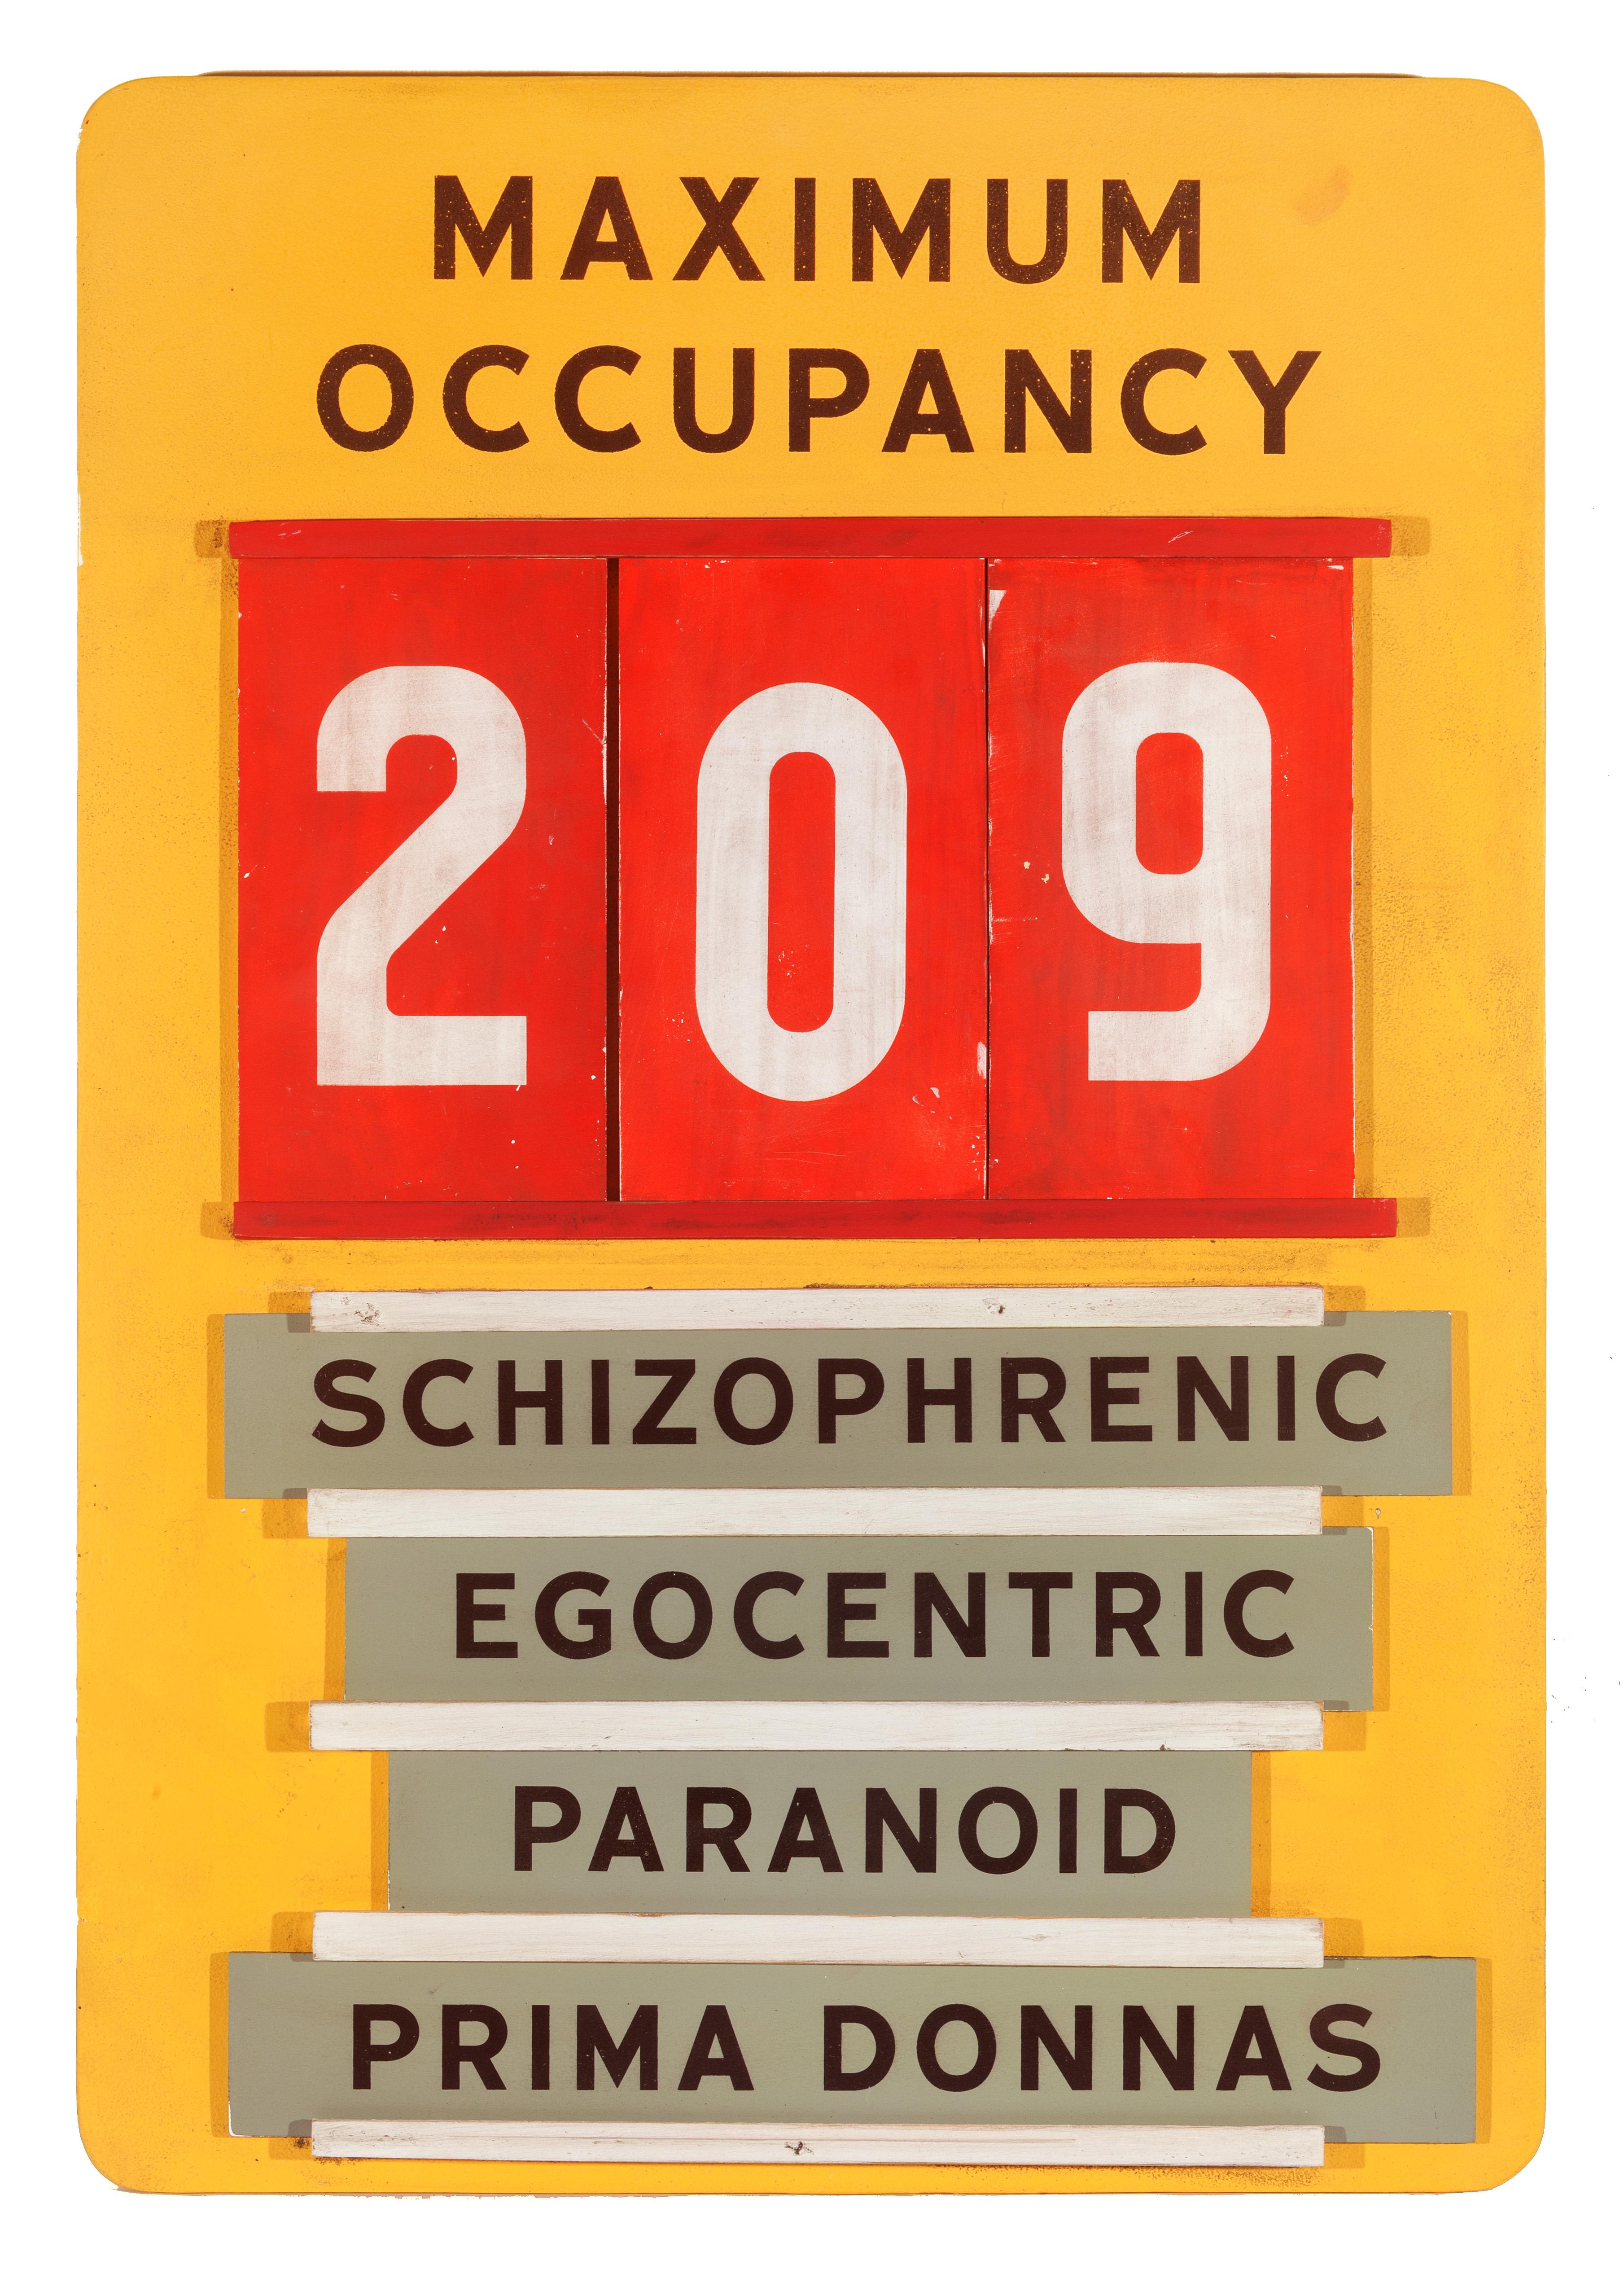 Maximum Occupancy (workplace safety sign) - Sculpture by Skylar Fein